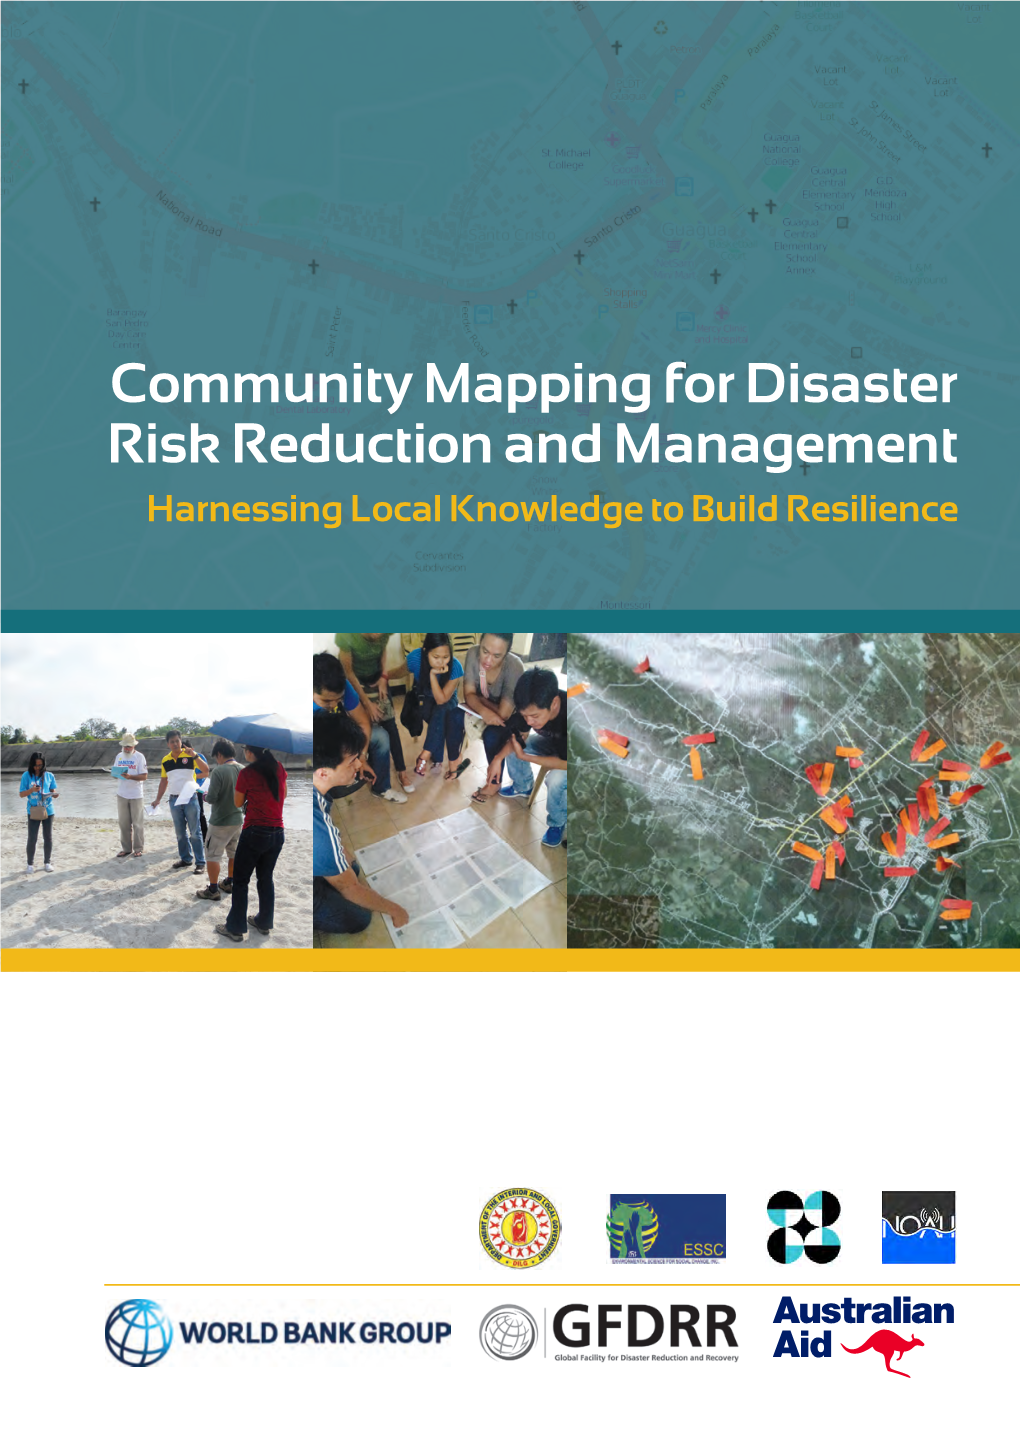 Community Mapping for Disaster Risk Reduction and Management